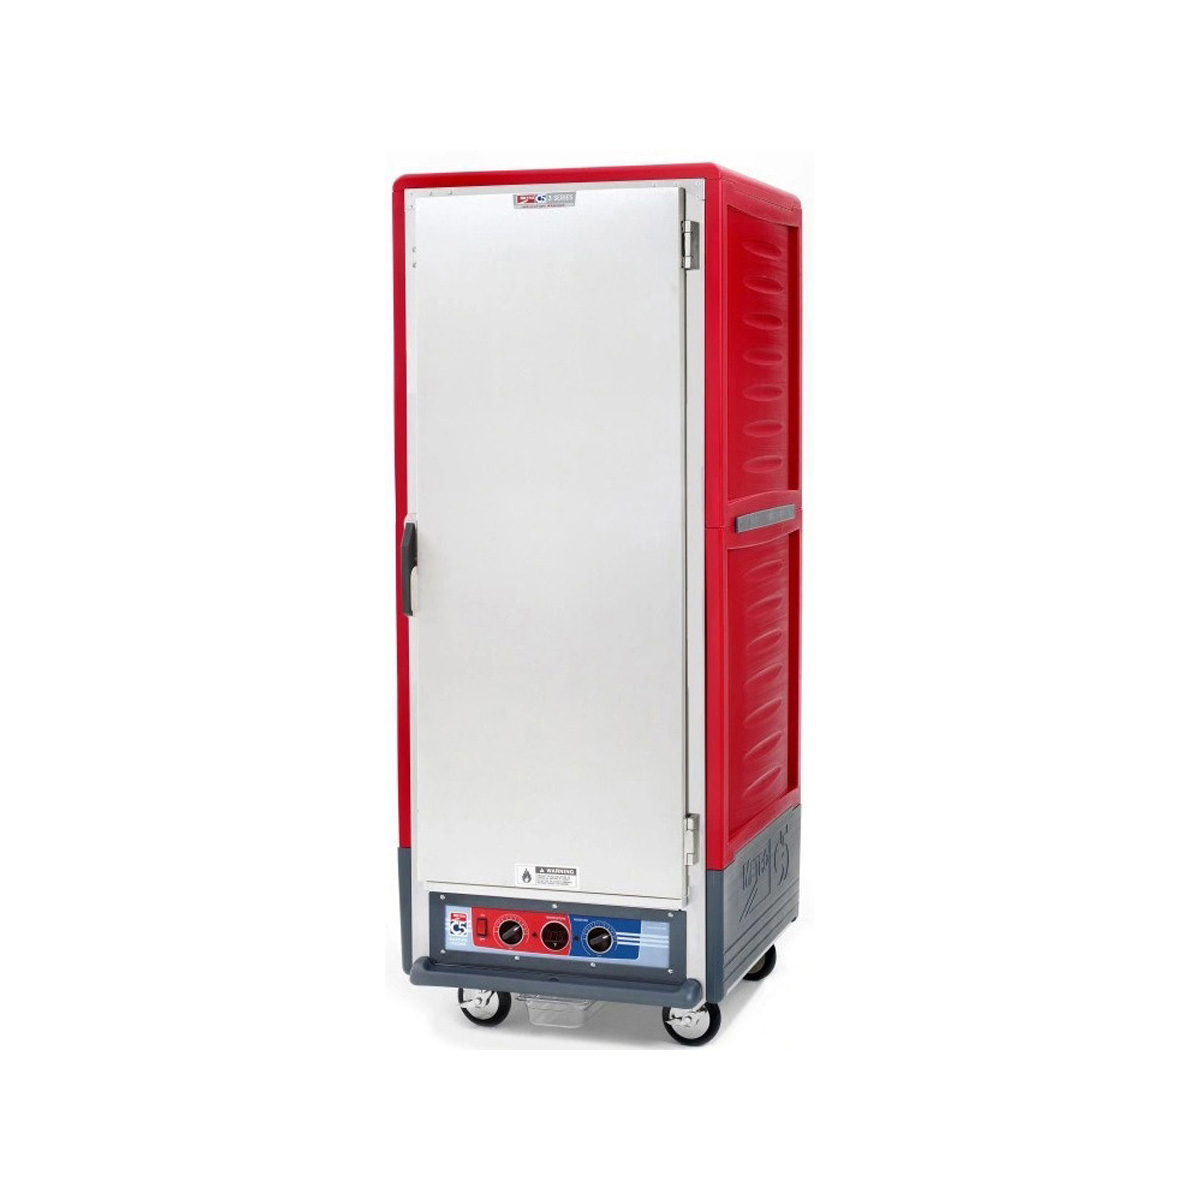 Metro C539-MFS-U C5 3 Series Insulated Mobile Proofing and Holding Cabinet